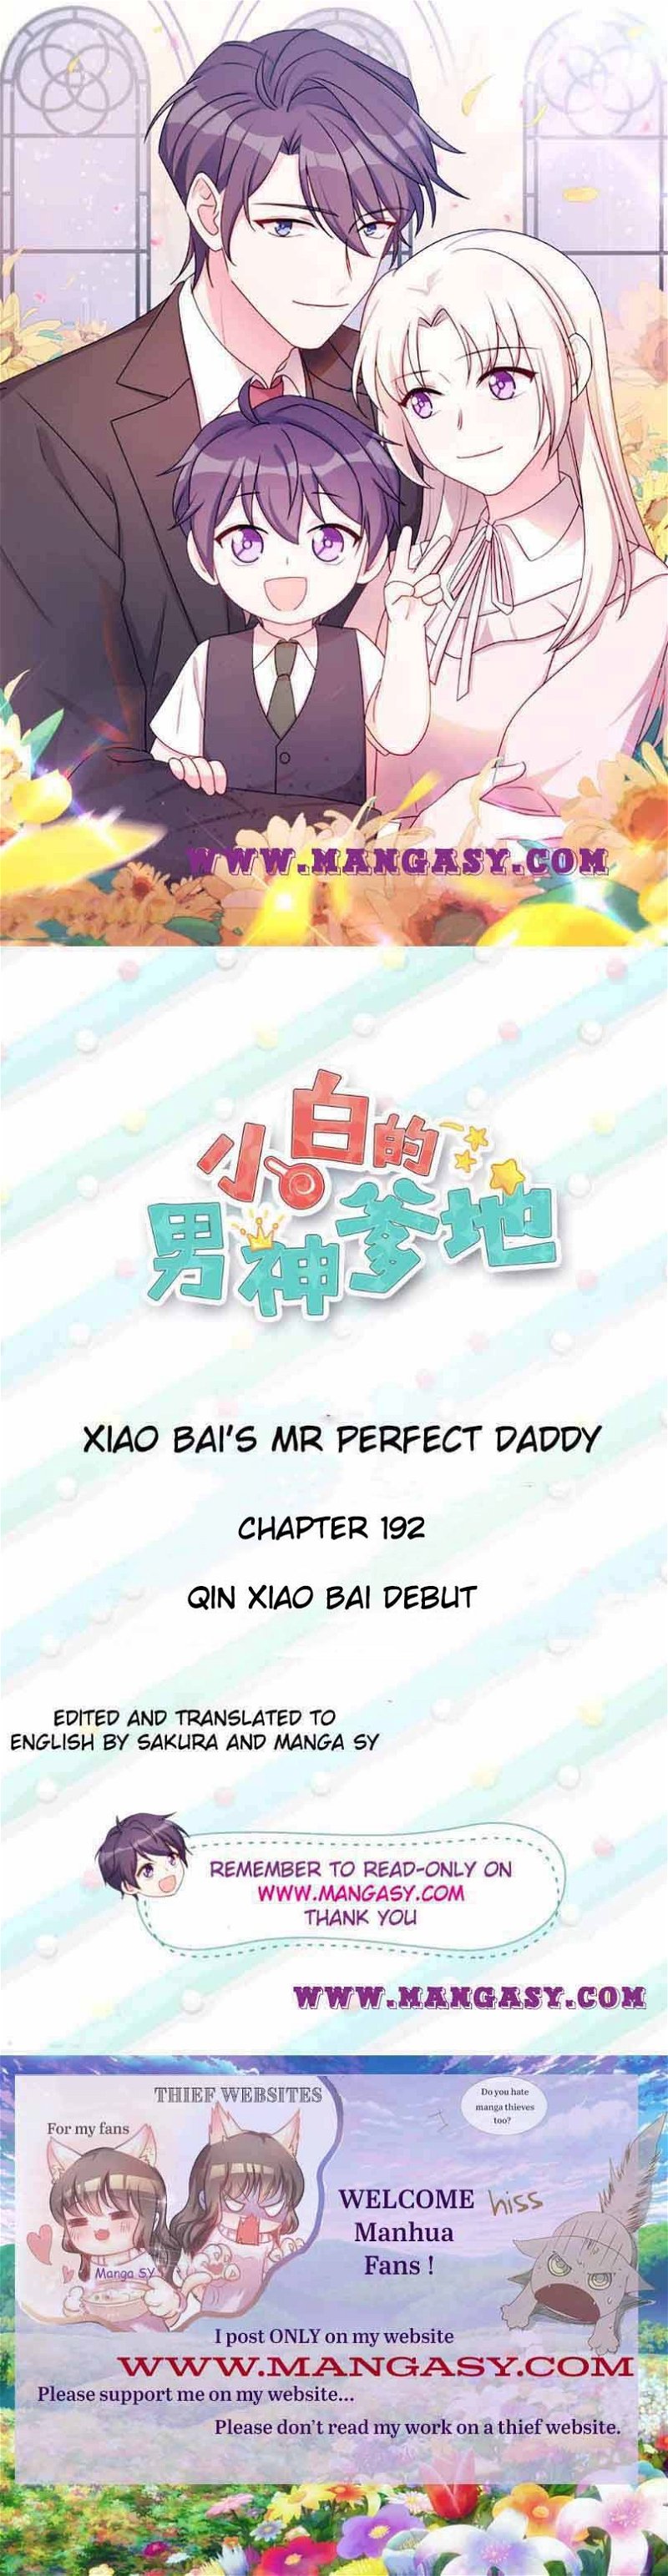 Xiao Bai’s father is a wonderful person Chapter 192 - Page 0